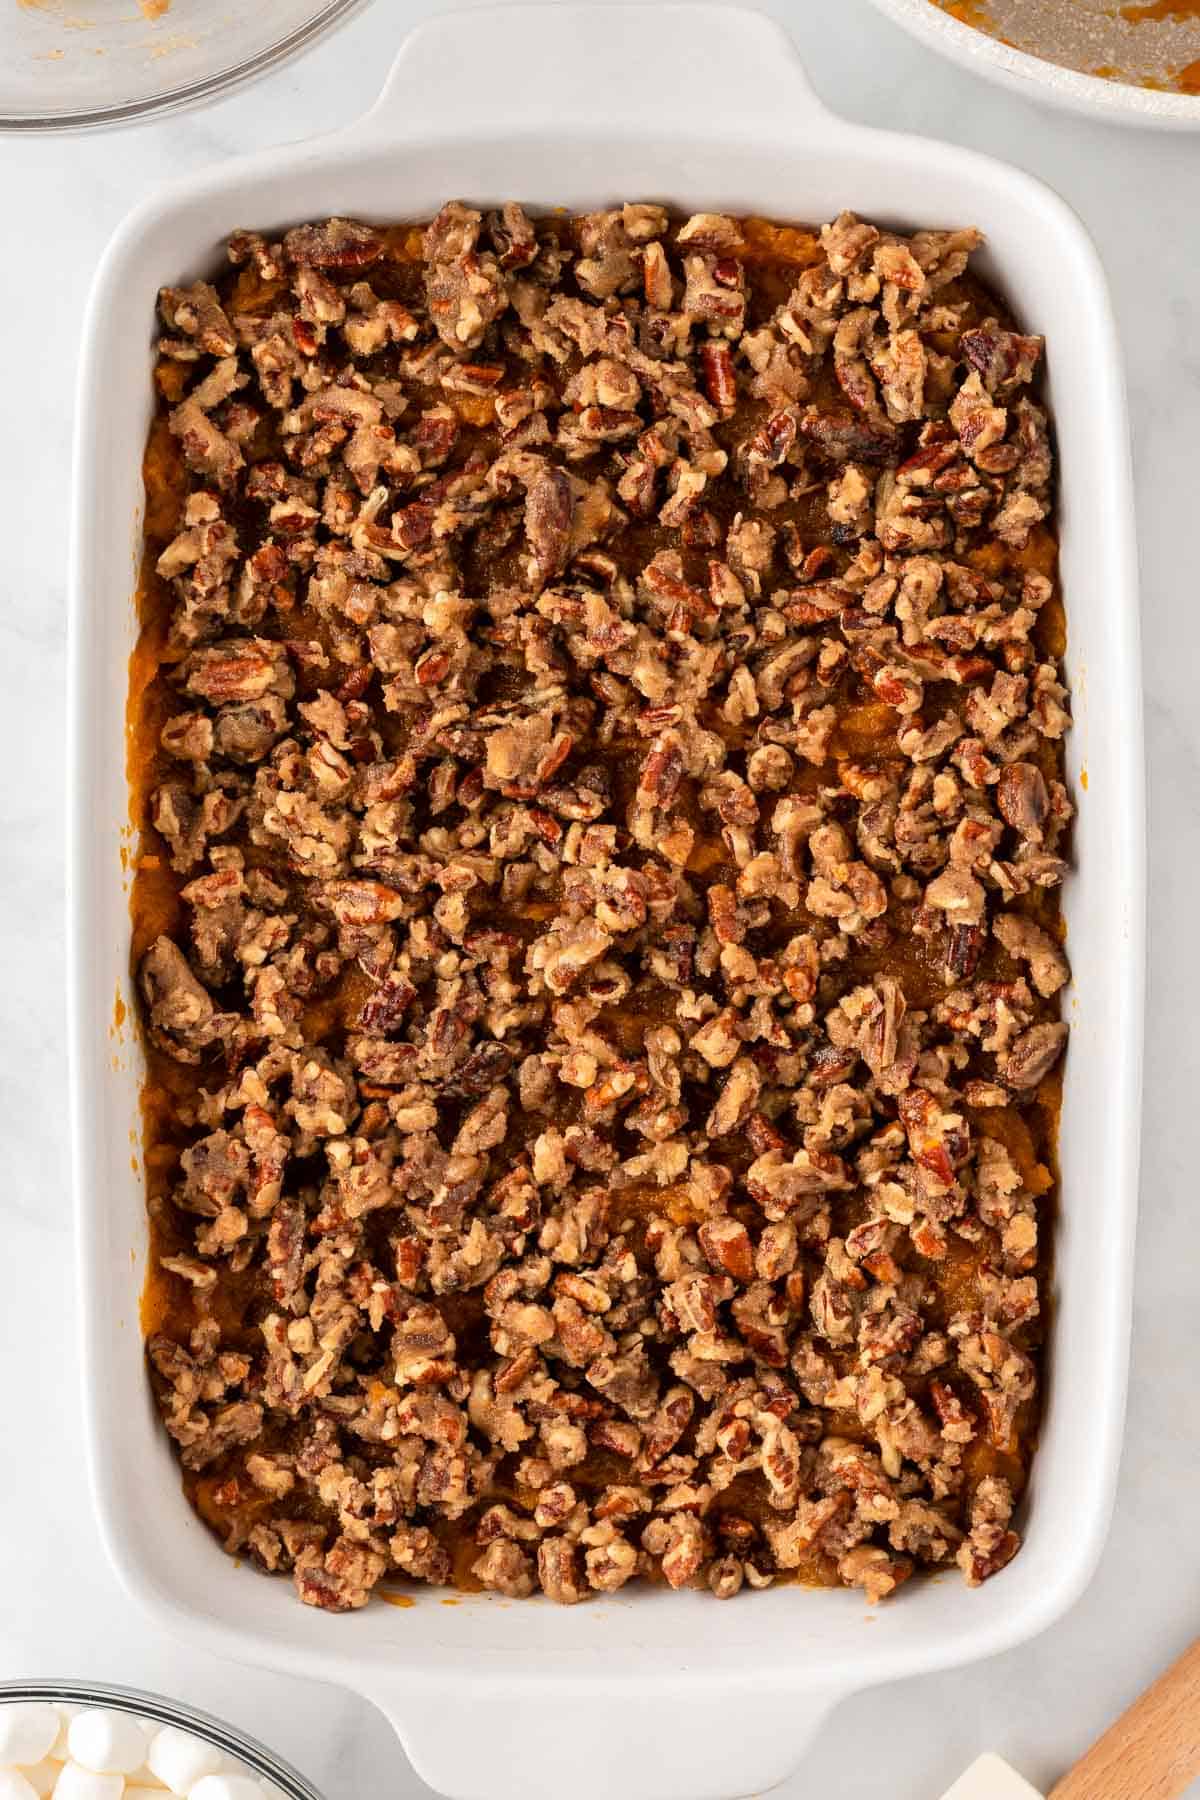 pecan crumble spread out over the sweet potato filling